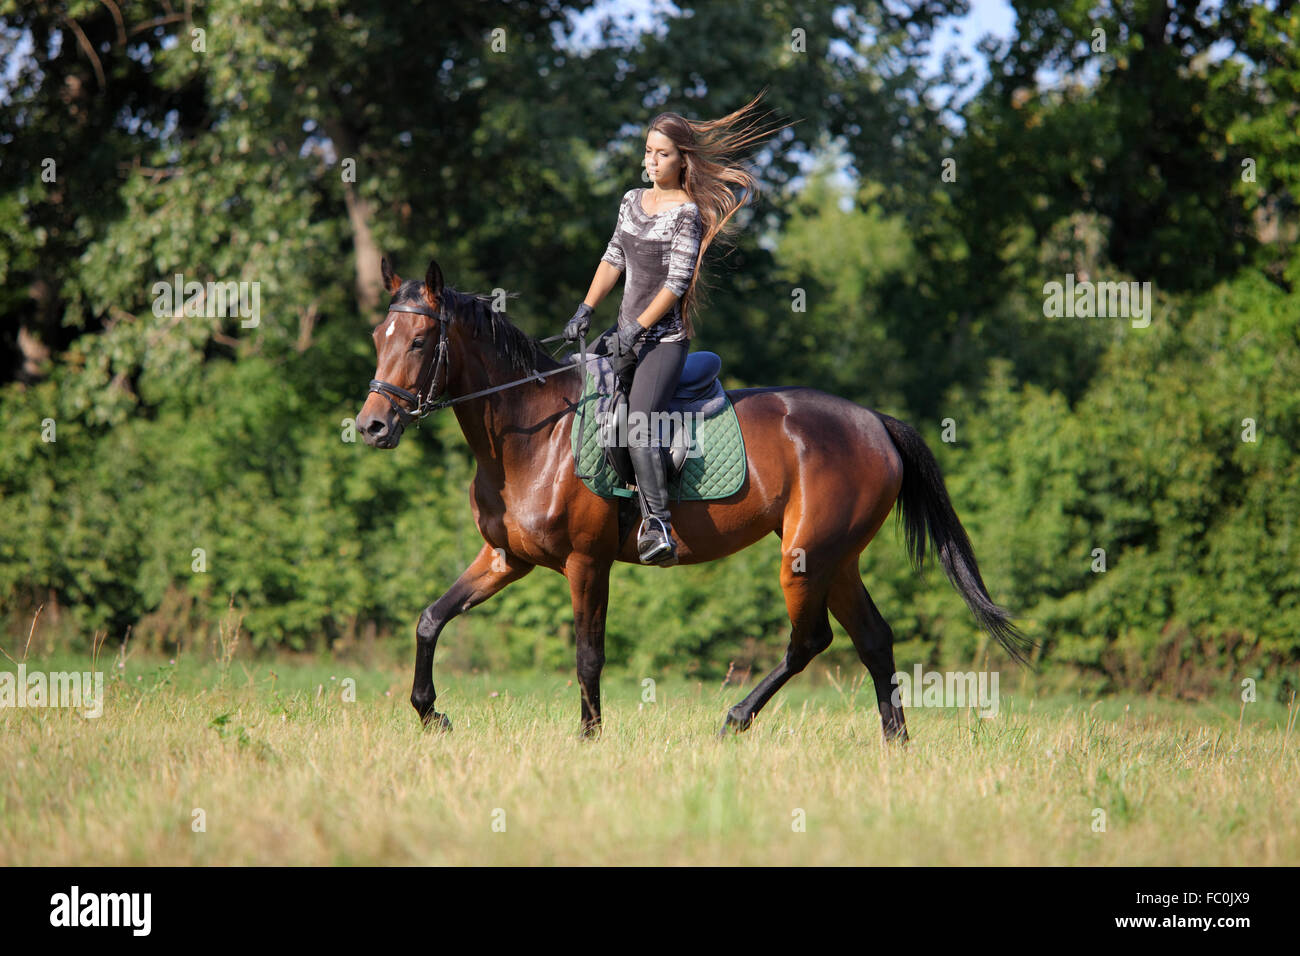 Young woman riding Trakehner horse in fields Stock Photo